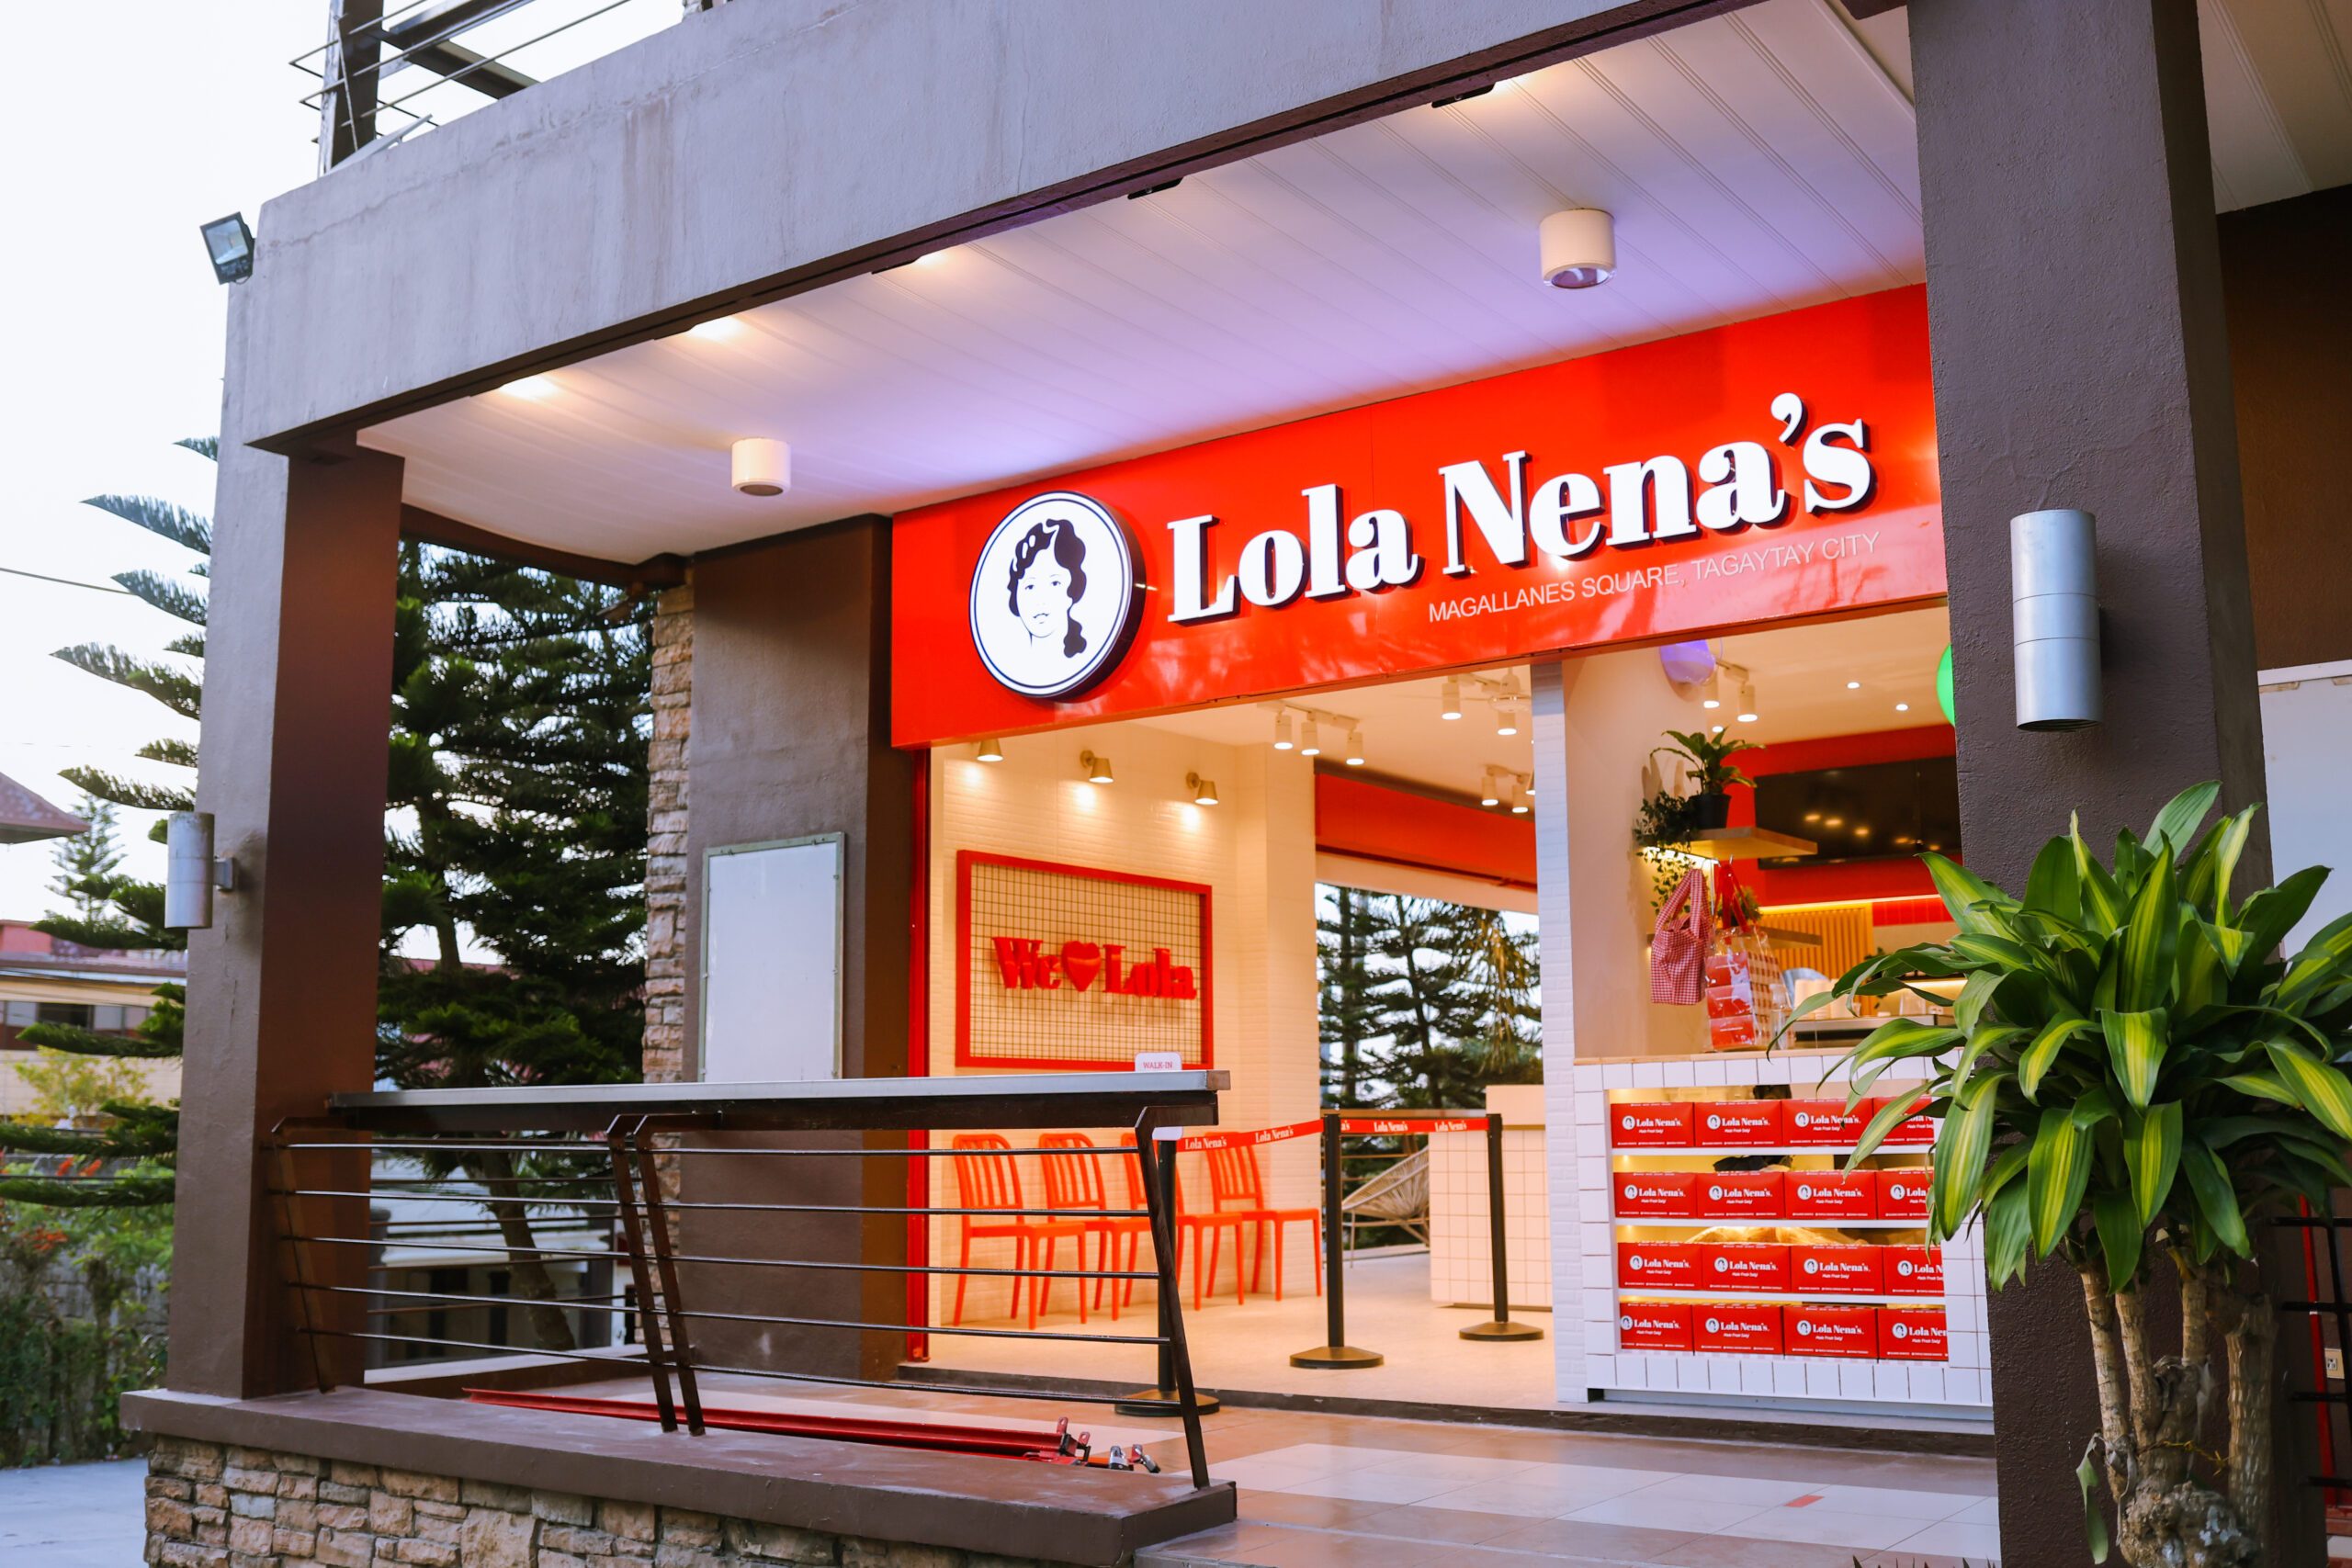 Donut pass this by! Lola Nena’s opens first dine-in café in Tagaytay City